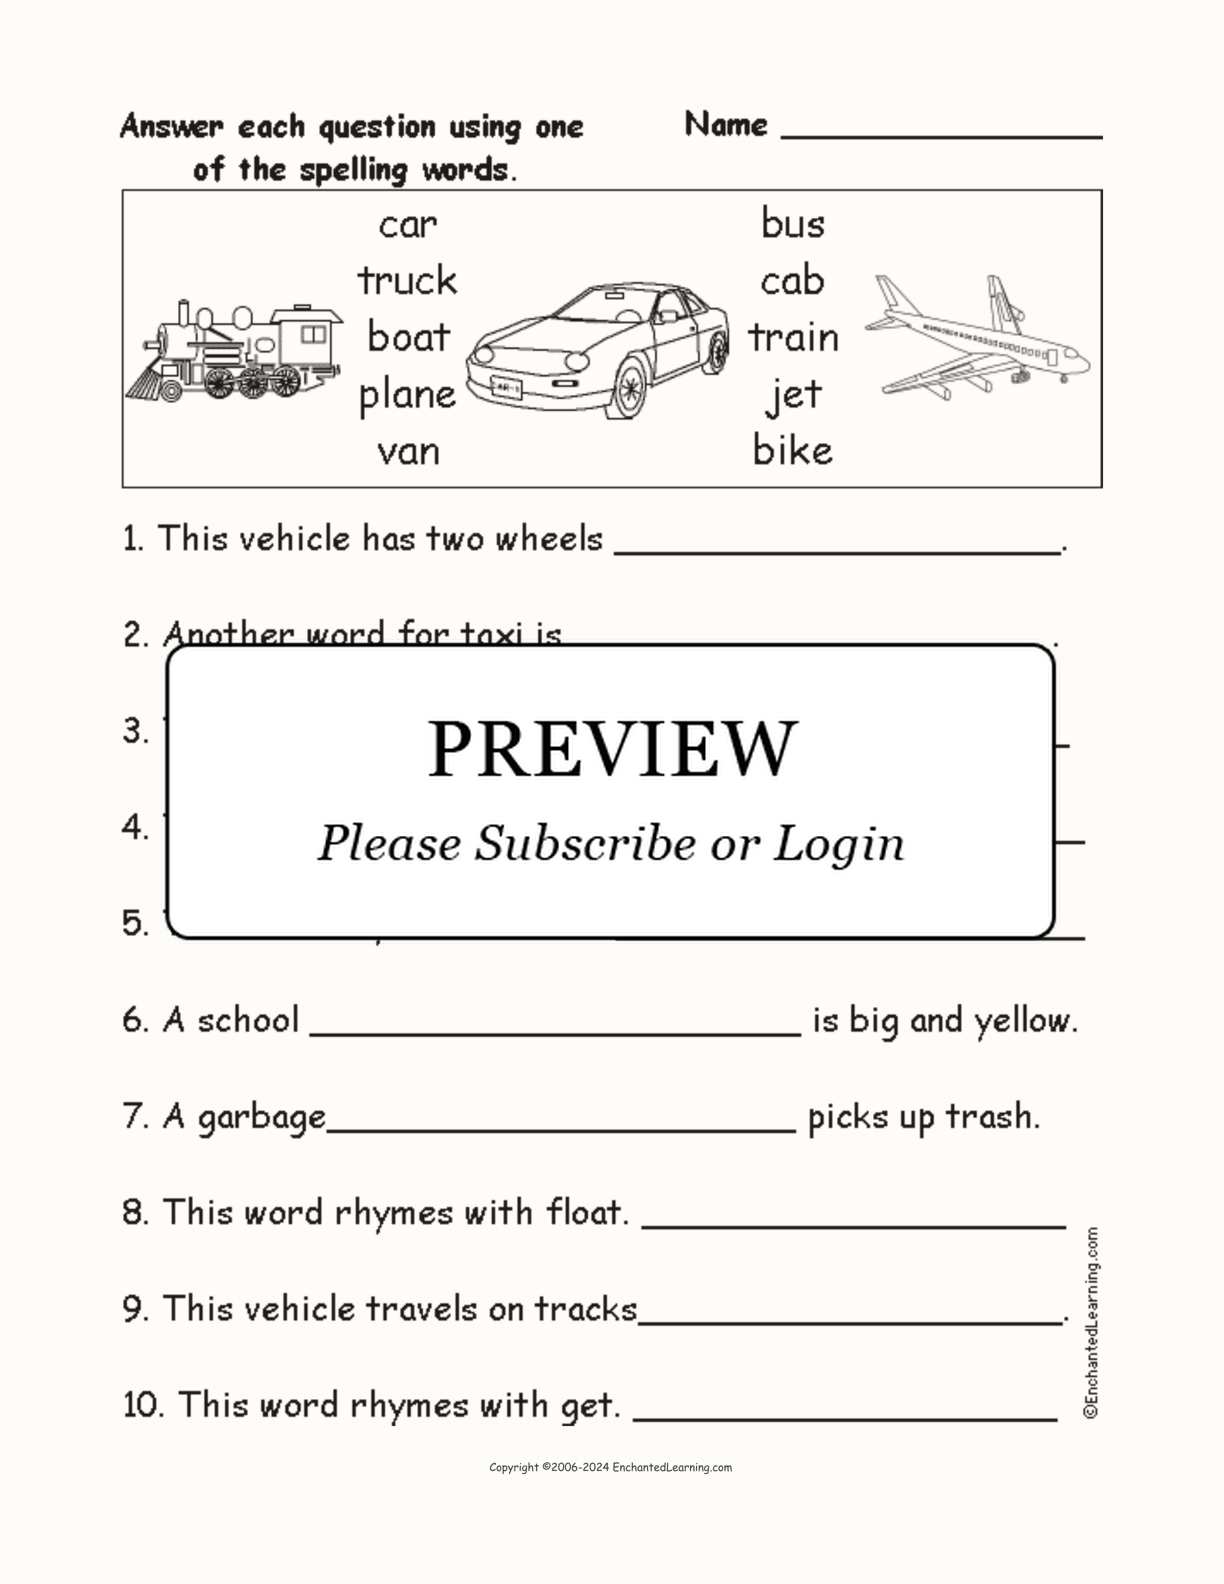 Vehicles Spelling Word Questions interactive worksheet page 1